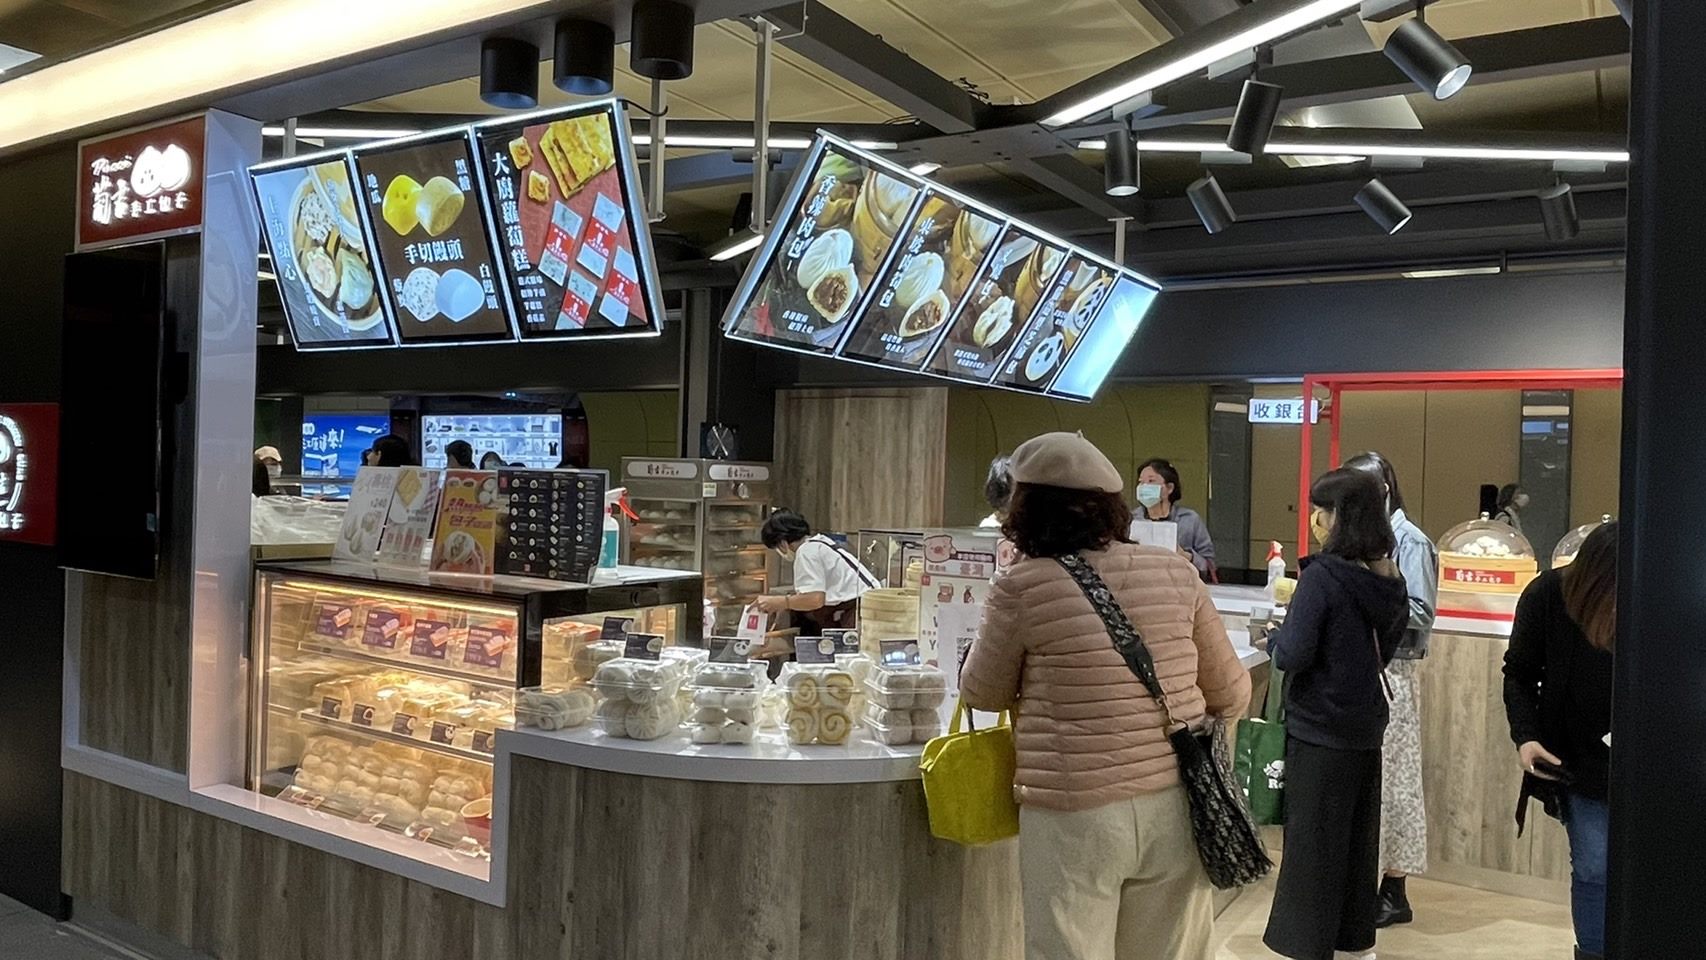 The Metro Corner, the first of its kind in Taipei's metro system, offers "dine-in" or "takeout" services located both inside and outside the station. (Photo / Provided by Taipei City Government)